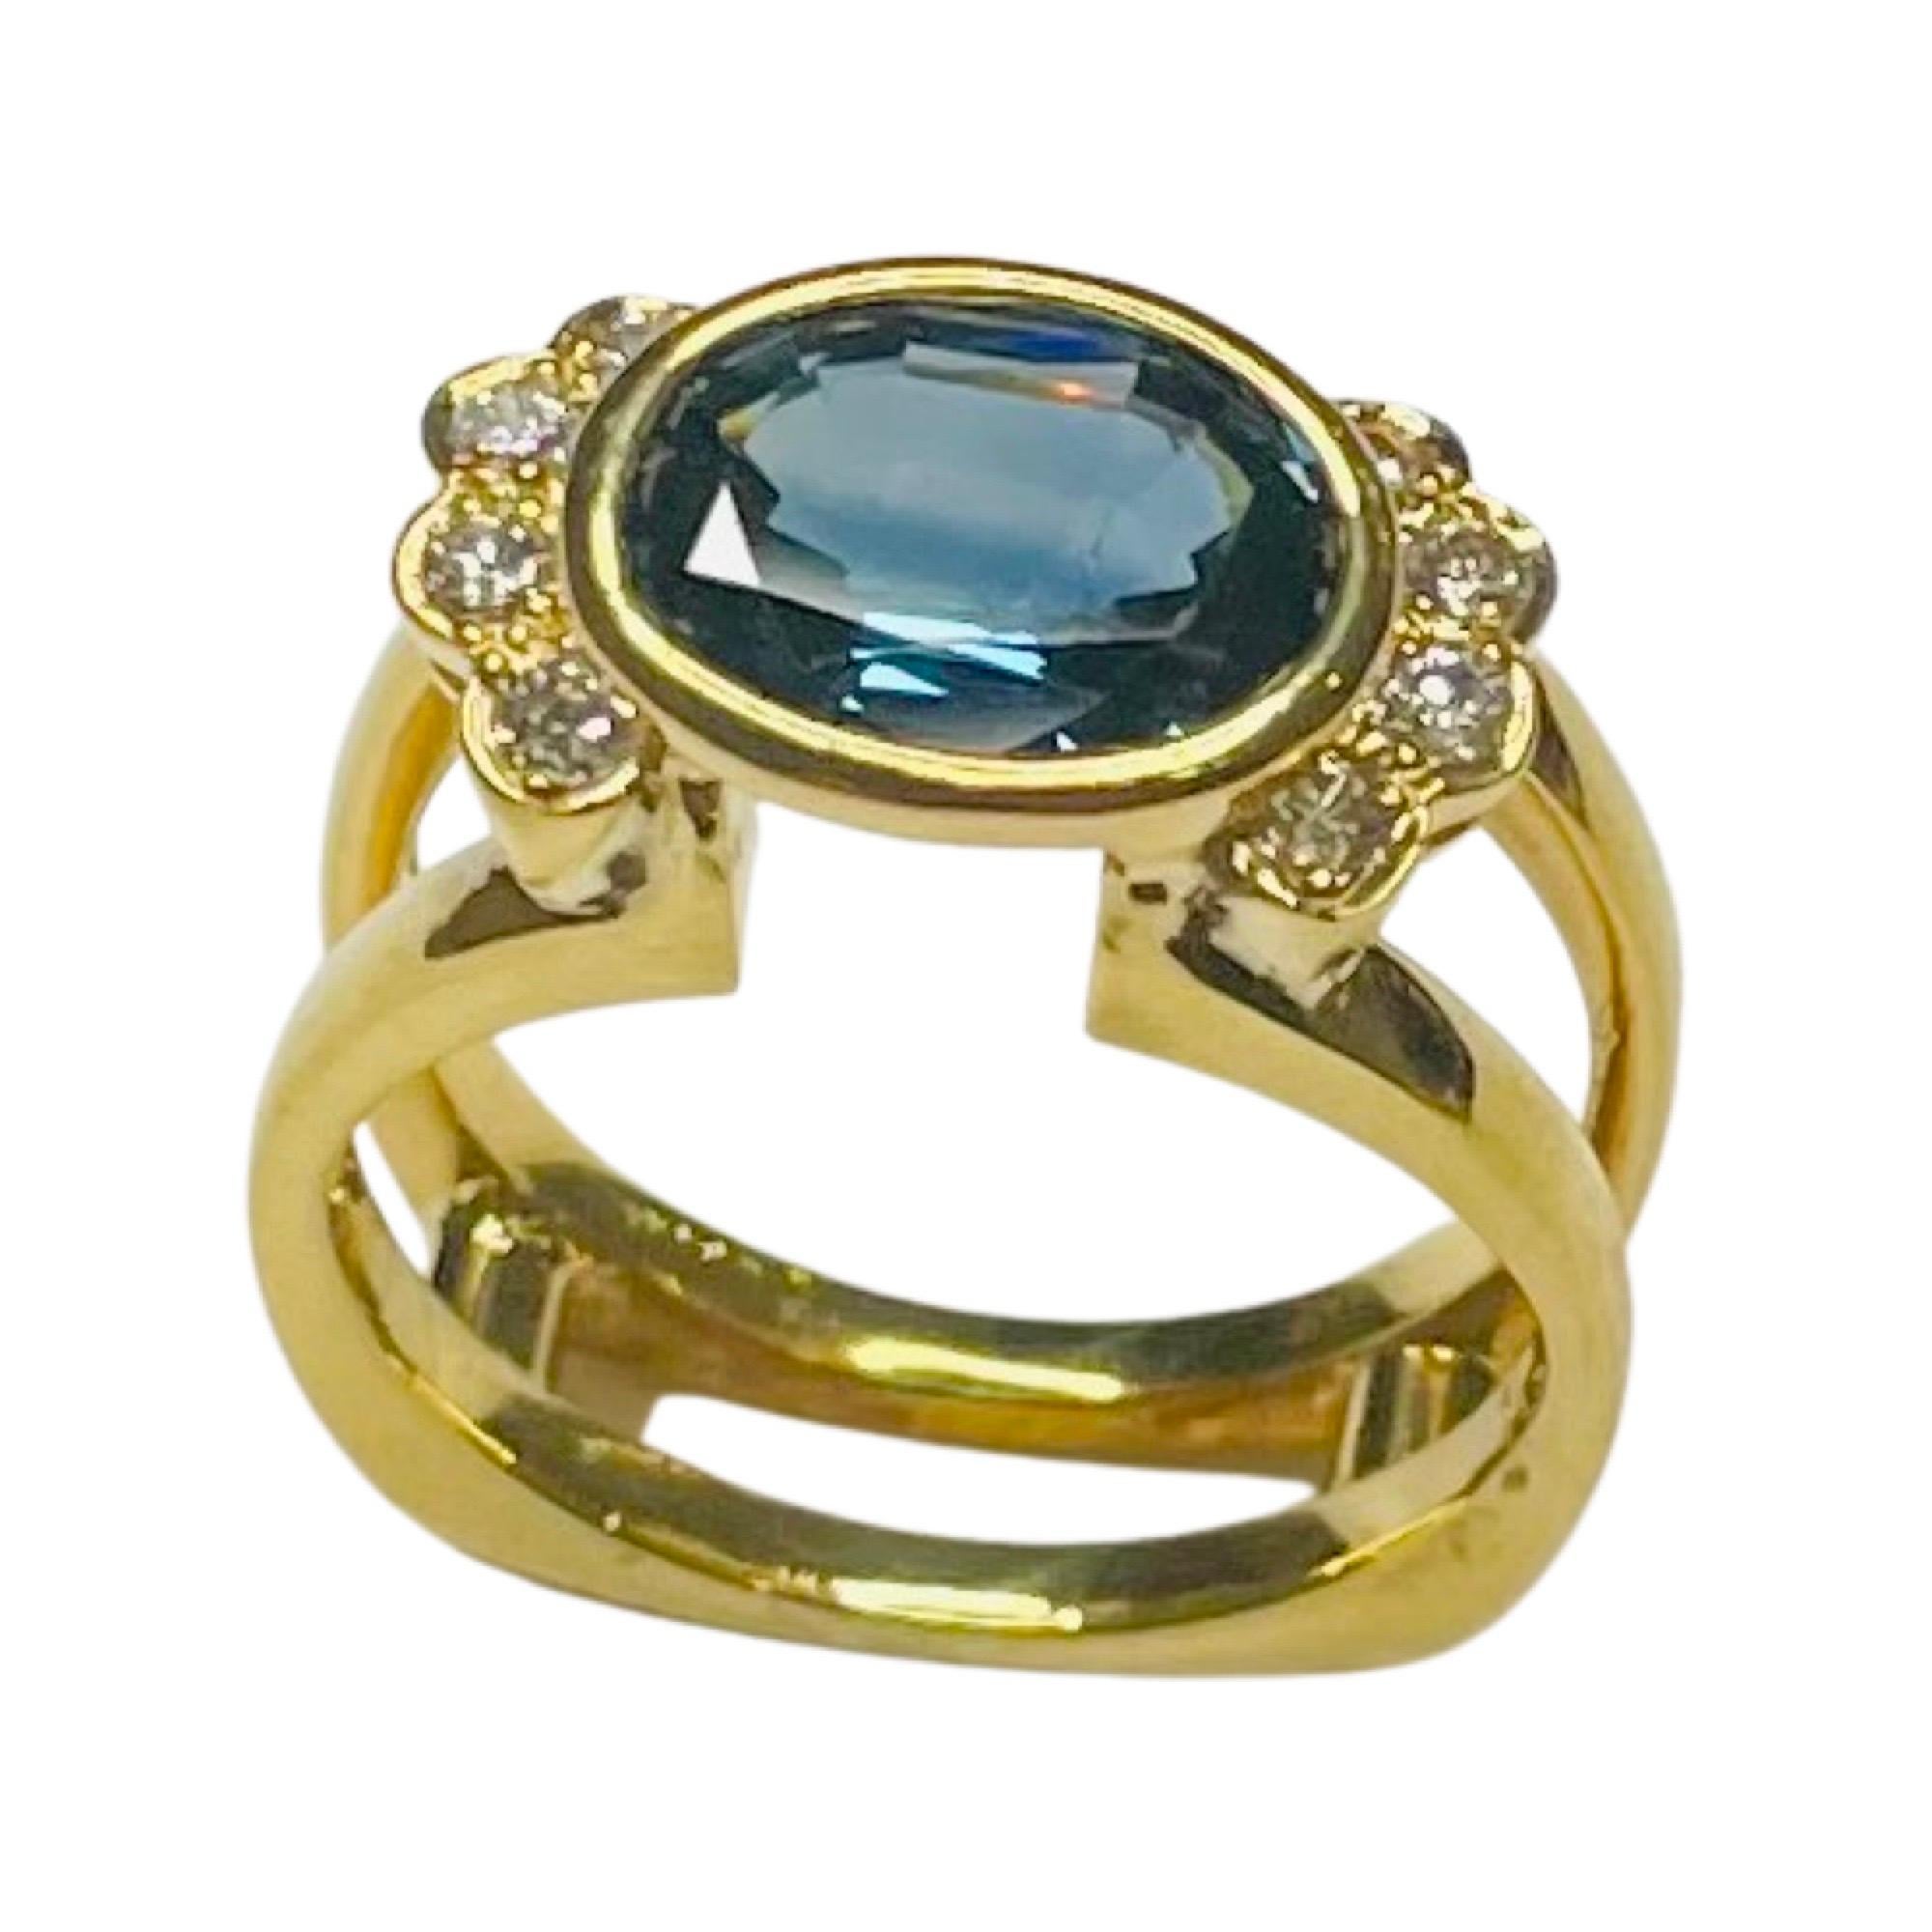 Lithos 18K Yellow Gold Natural Sapphire and Diamond Ring. The sapphire is natural and weighs 3.39 carats.  It measures 10.55 mm X 8.2 mm X 4.5 mm. The sapphire is moderately strong, medium dark, violetish blue in color. It is SI1 in Clarity. It is